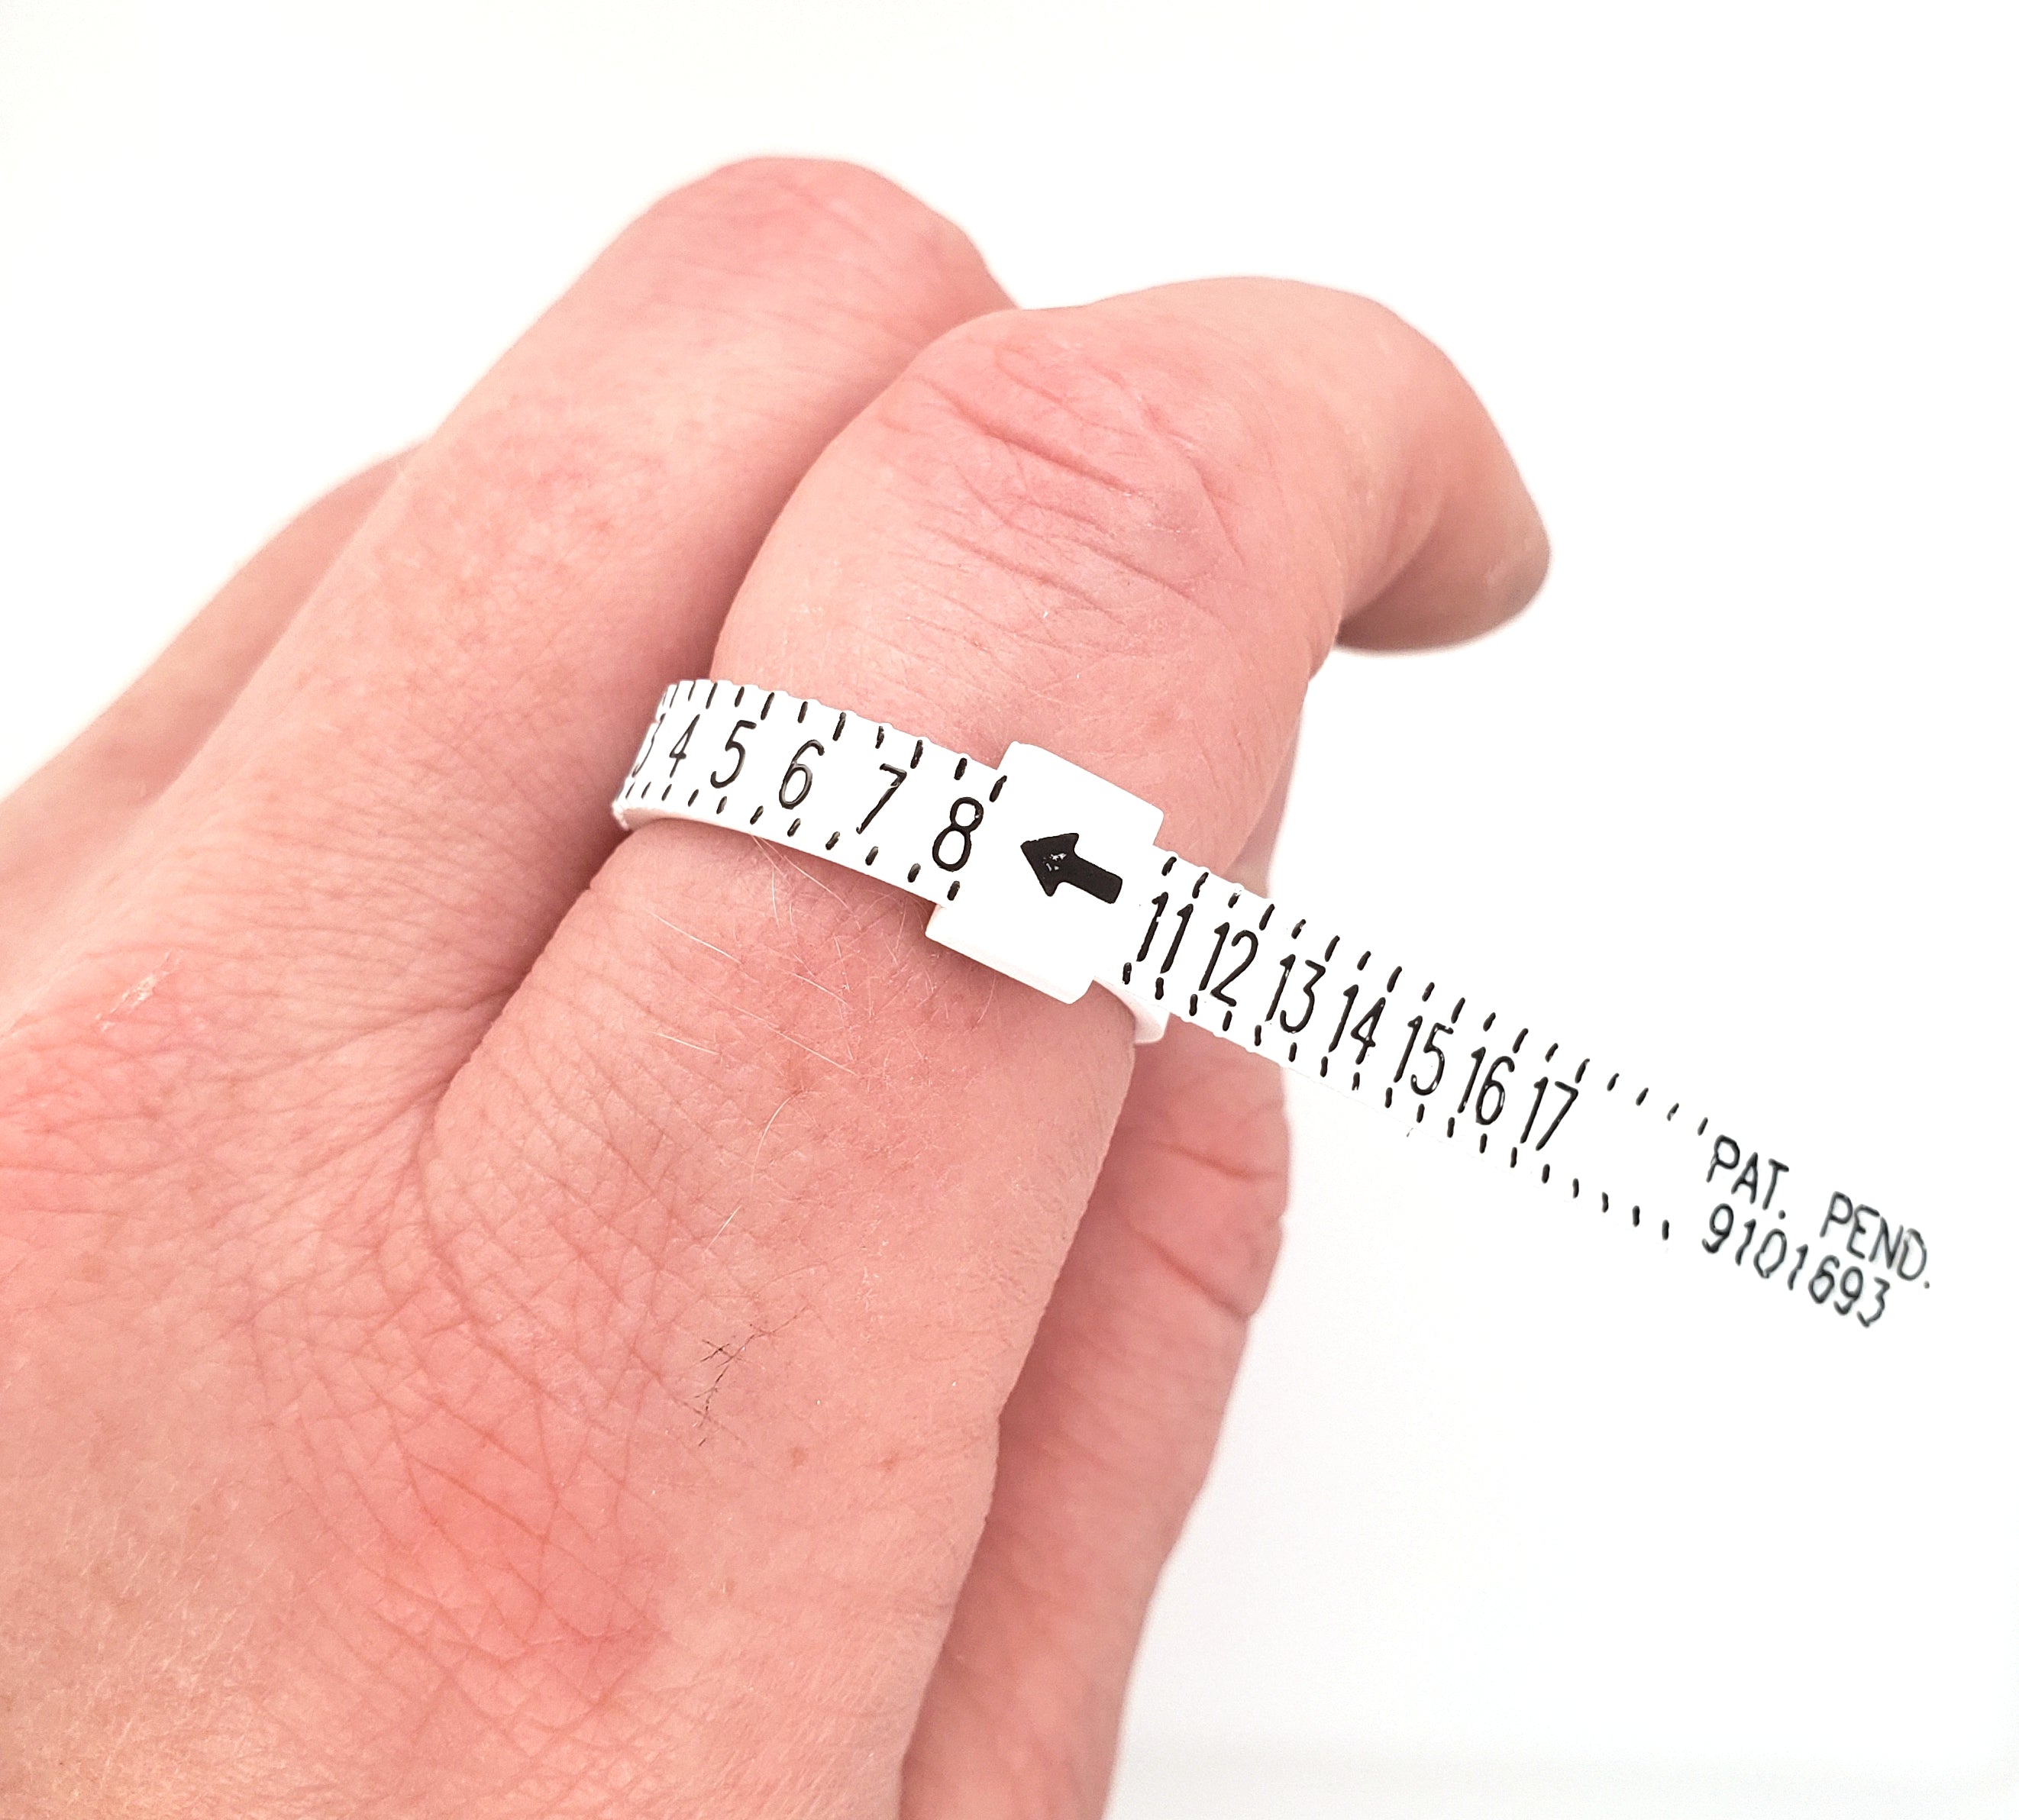 Ring Sizer – Ready-Made